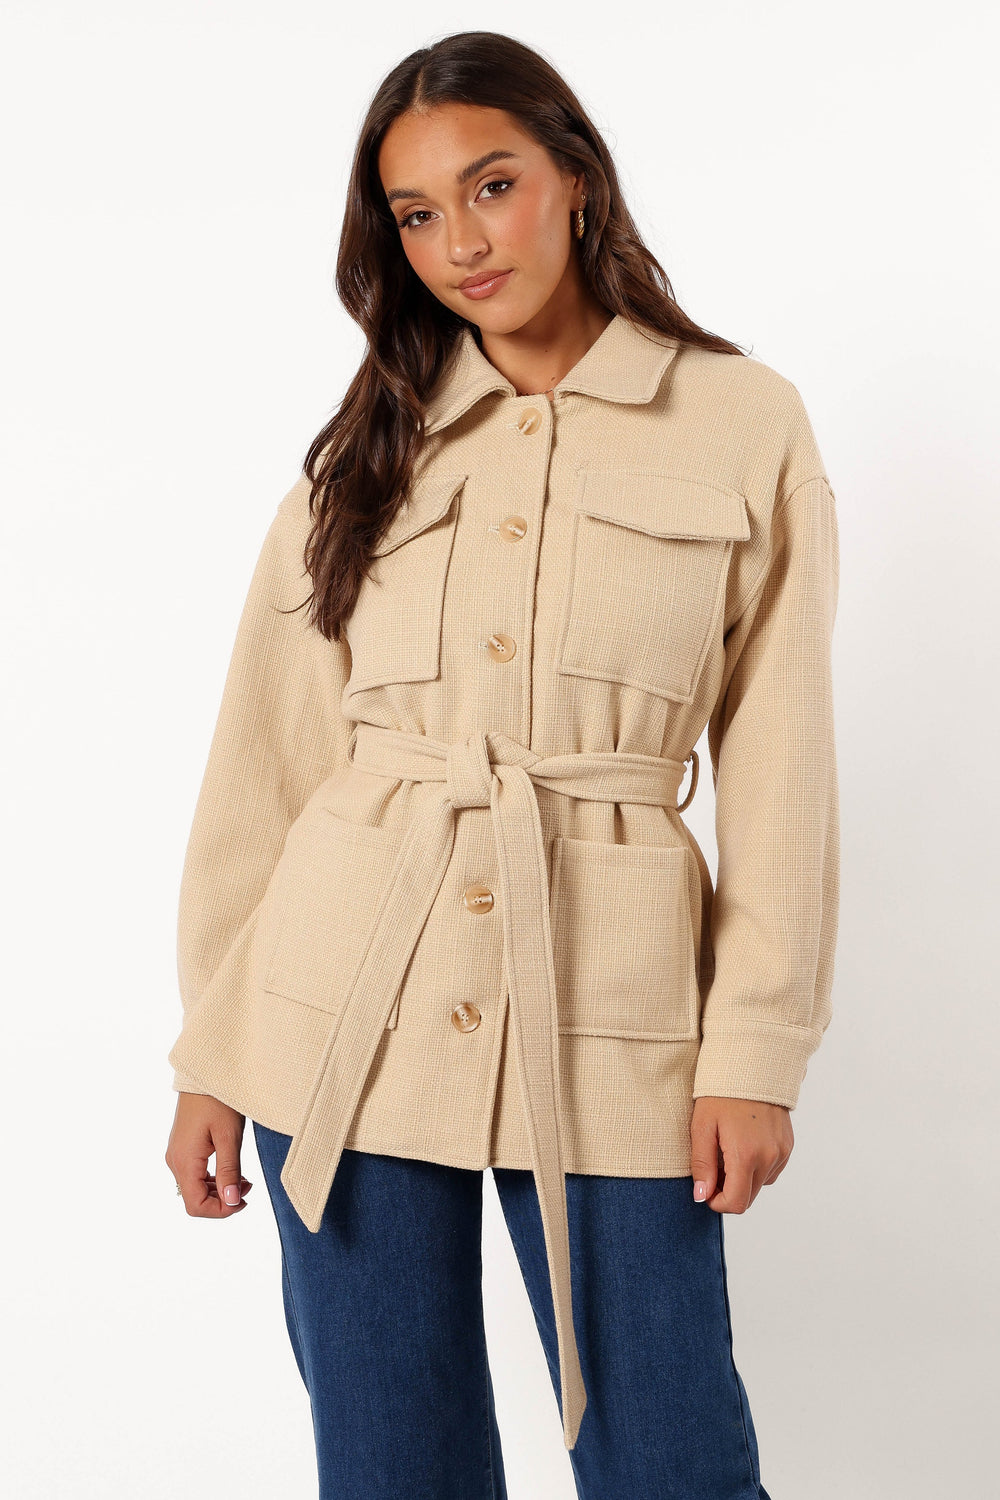 OUTERWEAR @Arlow Tie Front Shacket - Cream (Hold for Winter Essentials)